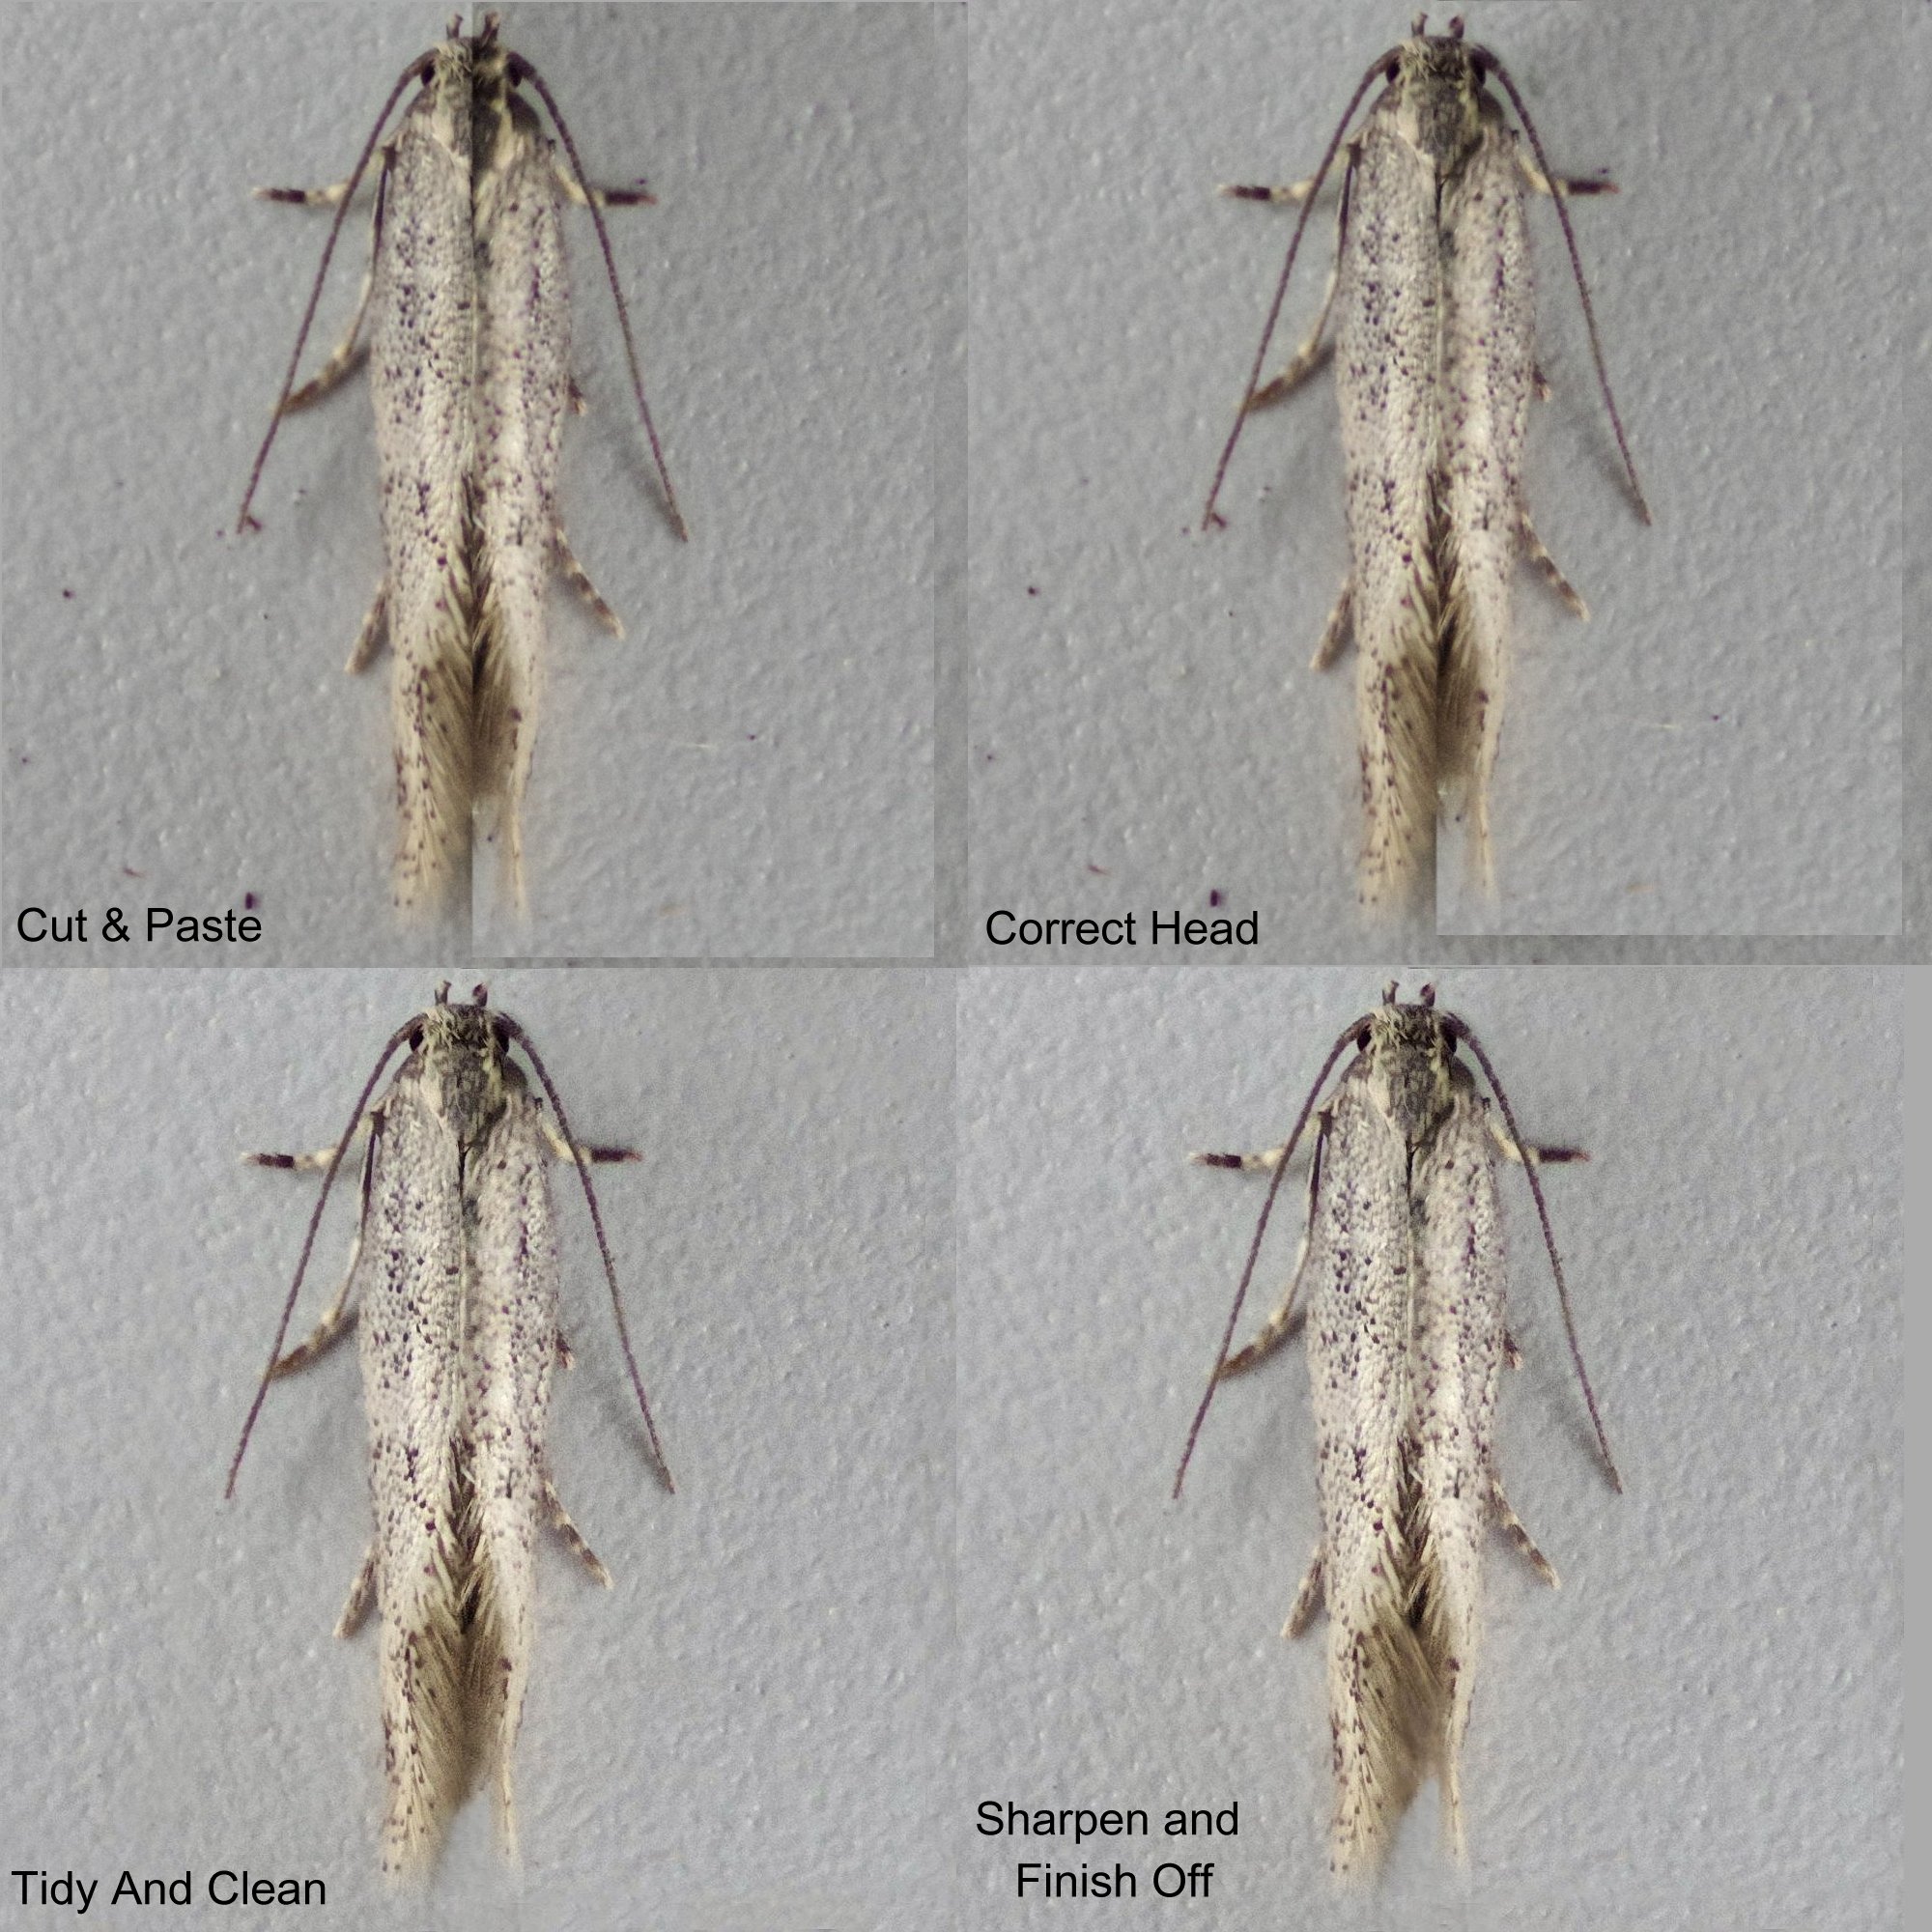 2x2 grid of photos of the Little Dwarf moth showing the final steps of my processing